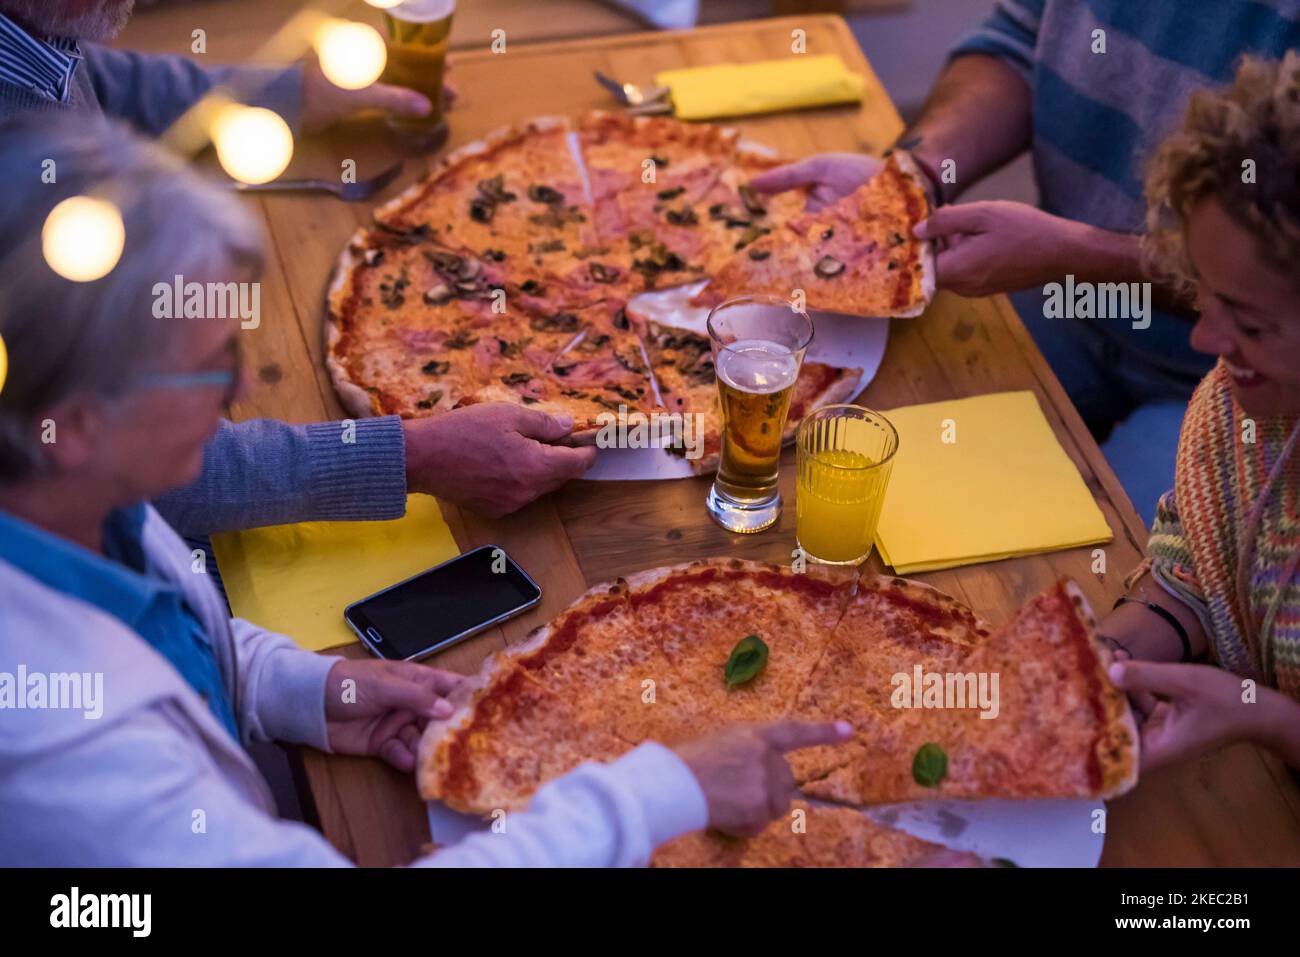 group of four poeple eating pizza and drinking beer together at night at home or in a restaurant - family together celebrating something Stock Photo